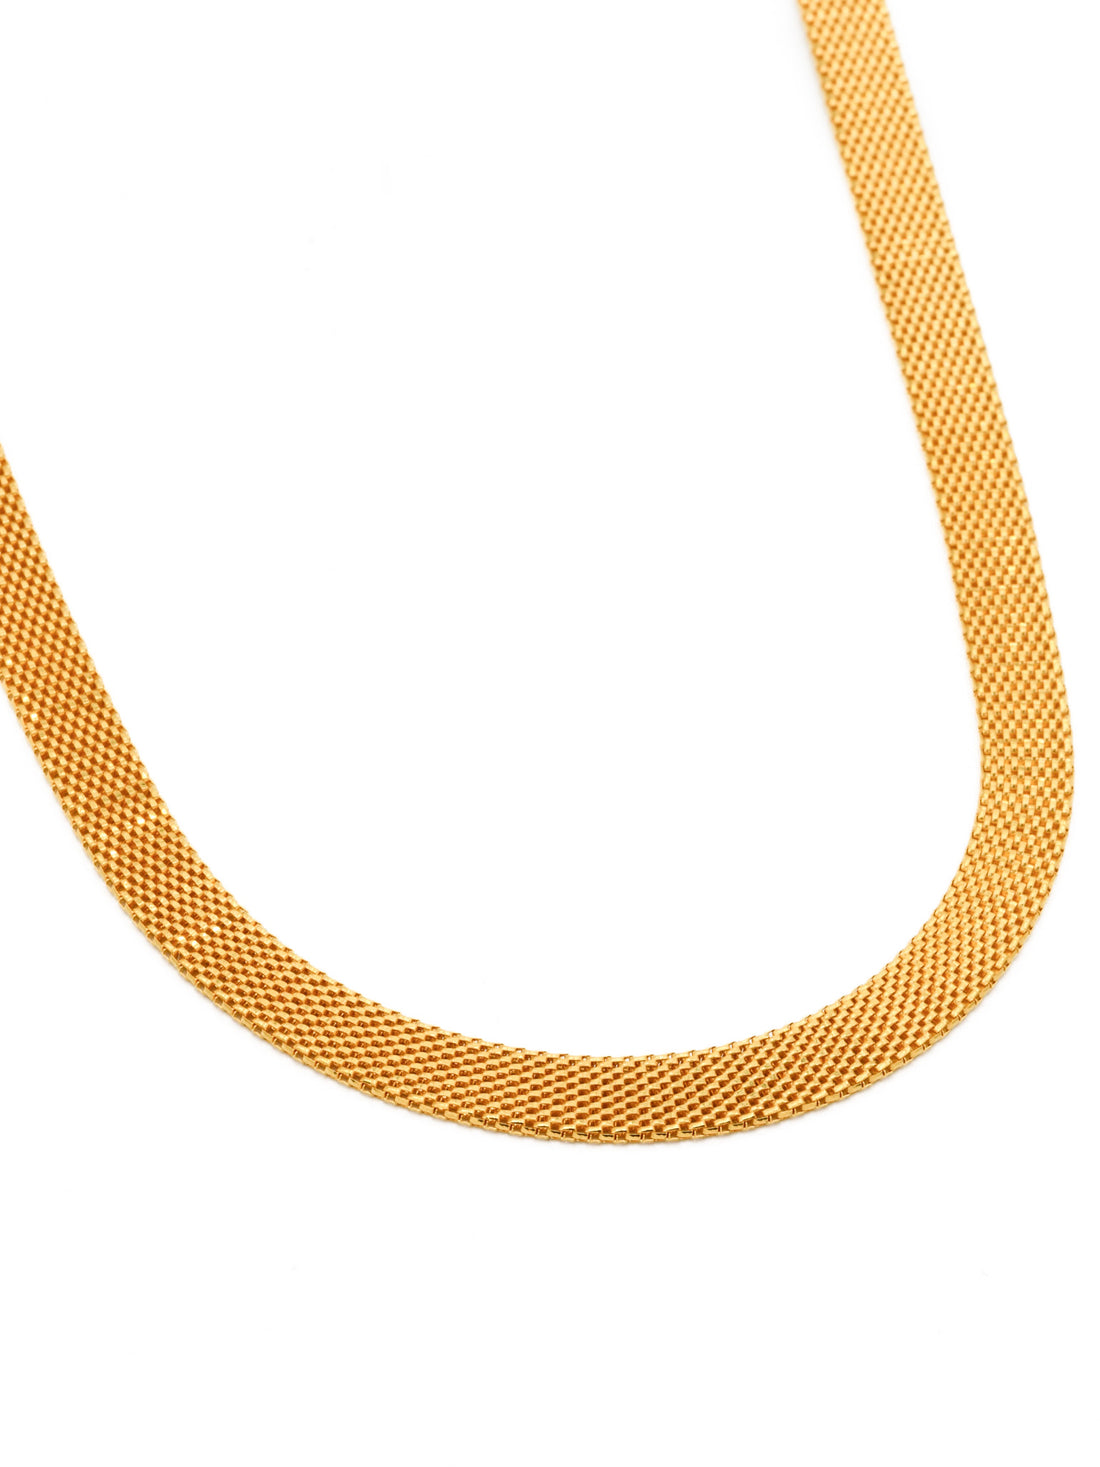 22ct Gold Hollow Mens Chain - Roop Darshan